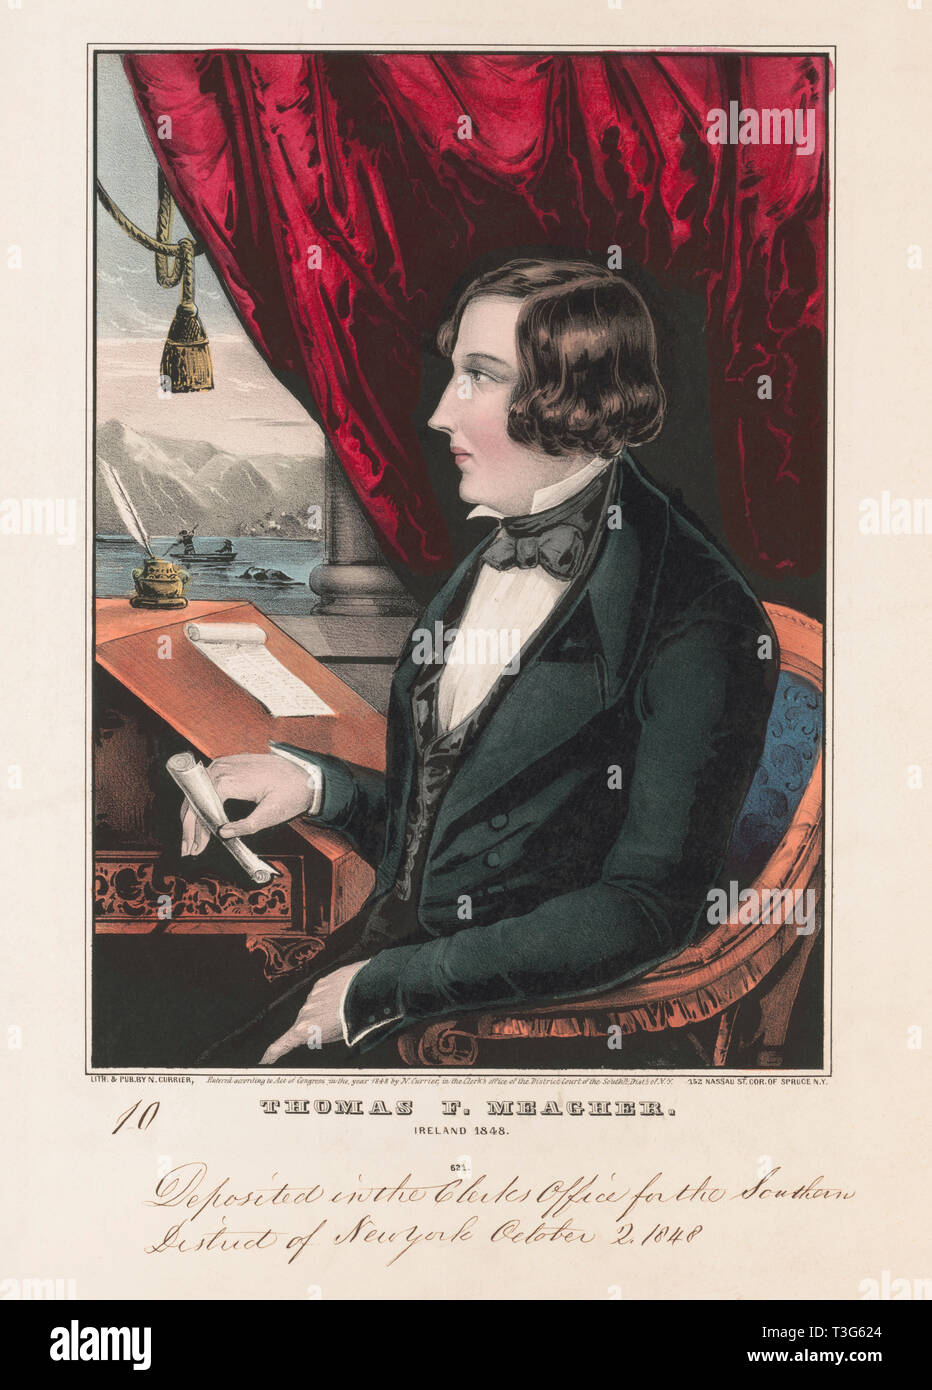 Thomas F. Meagher, Ireland, 1848, Irish Nationalist and leader of the Young Irelanders in the Rebellion of 1848, Lithograph, Nathaniel Currier, 1848 Stock Photo